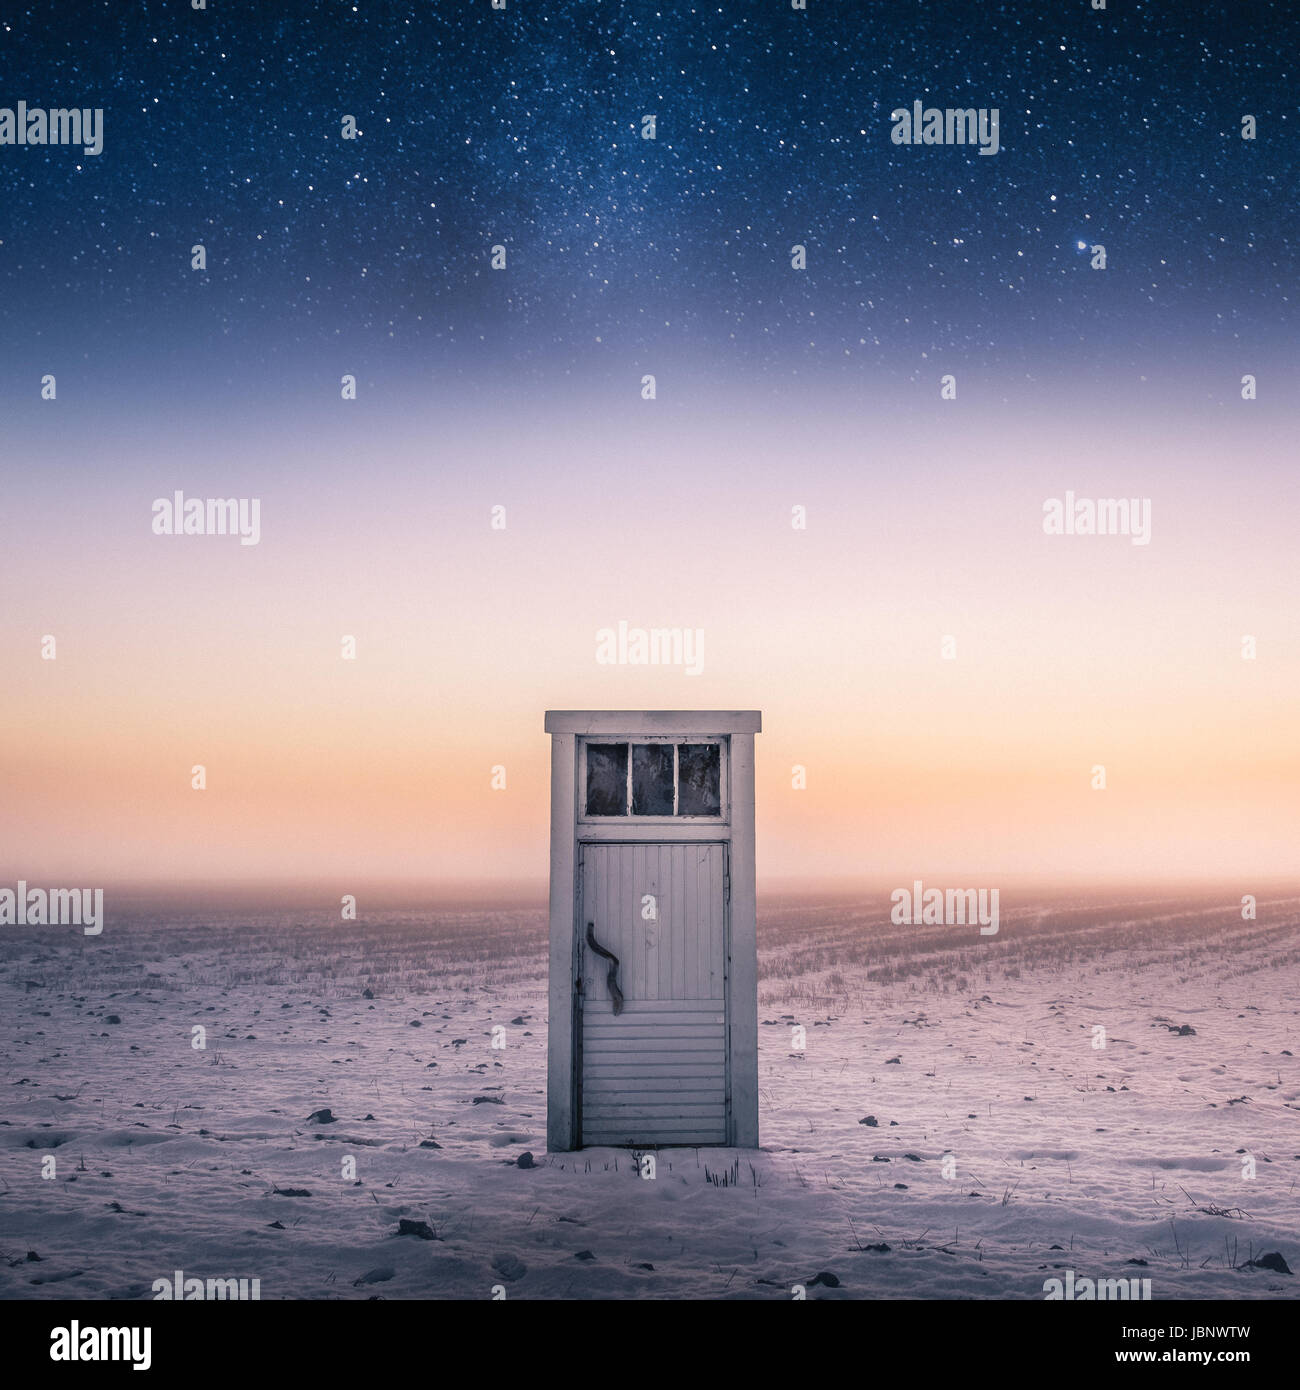 Magical and imagination scene with door and stars at night time Stock Photo